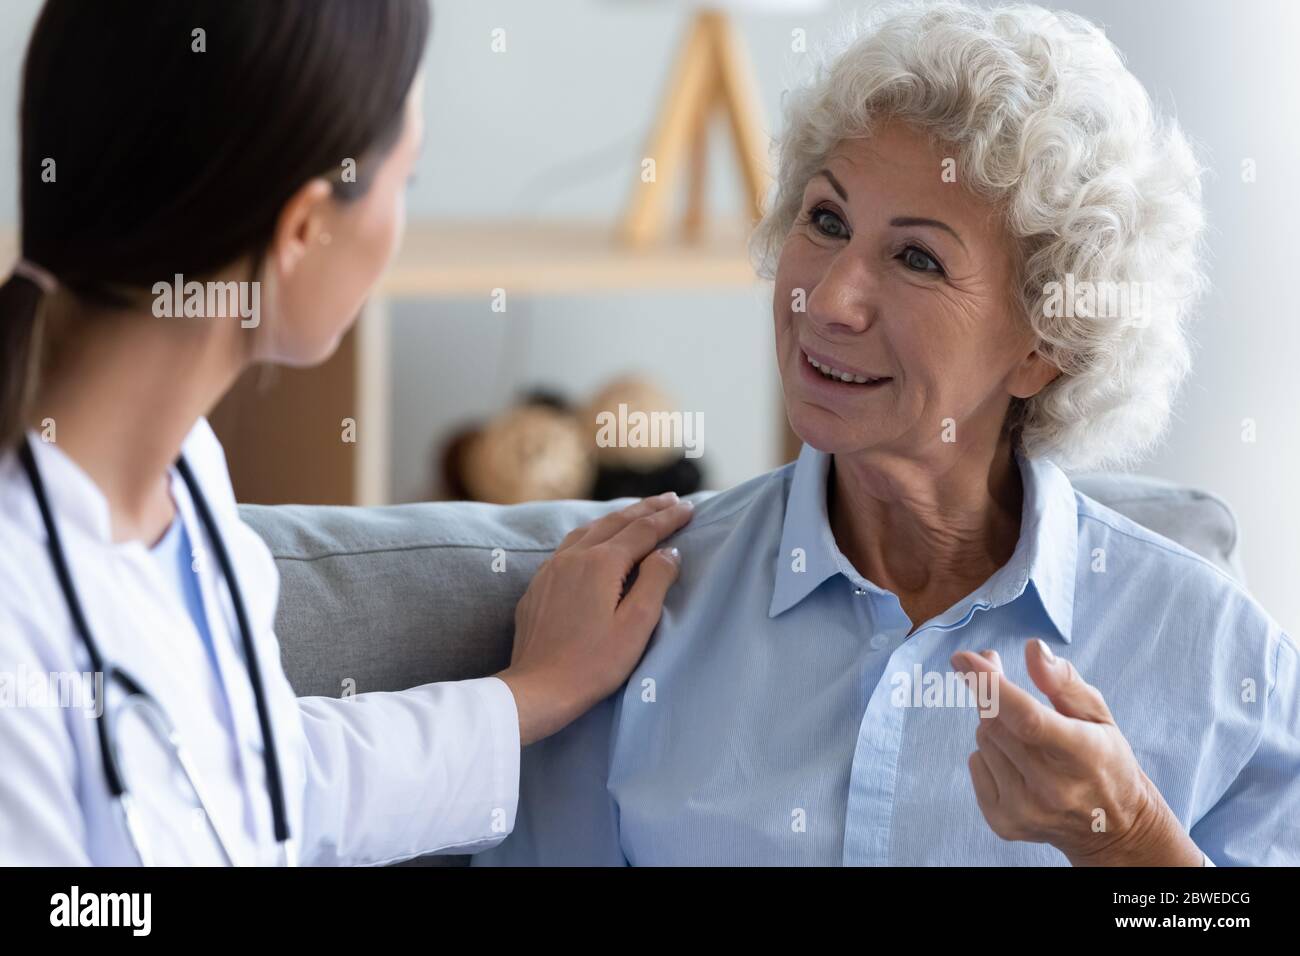 Elderly woman patient talk to young medic in white coat Stock Photo